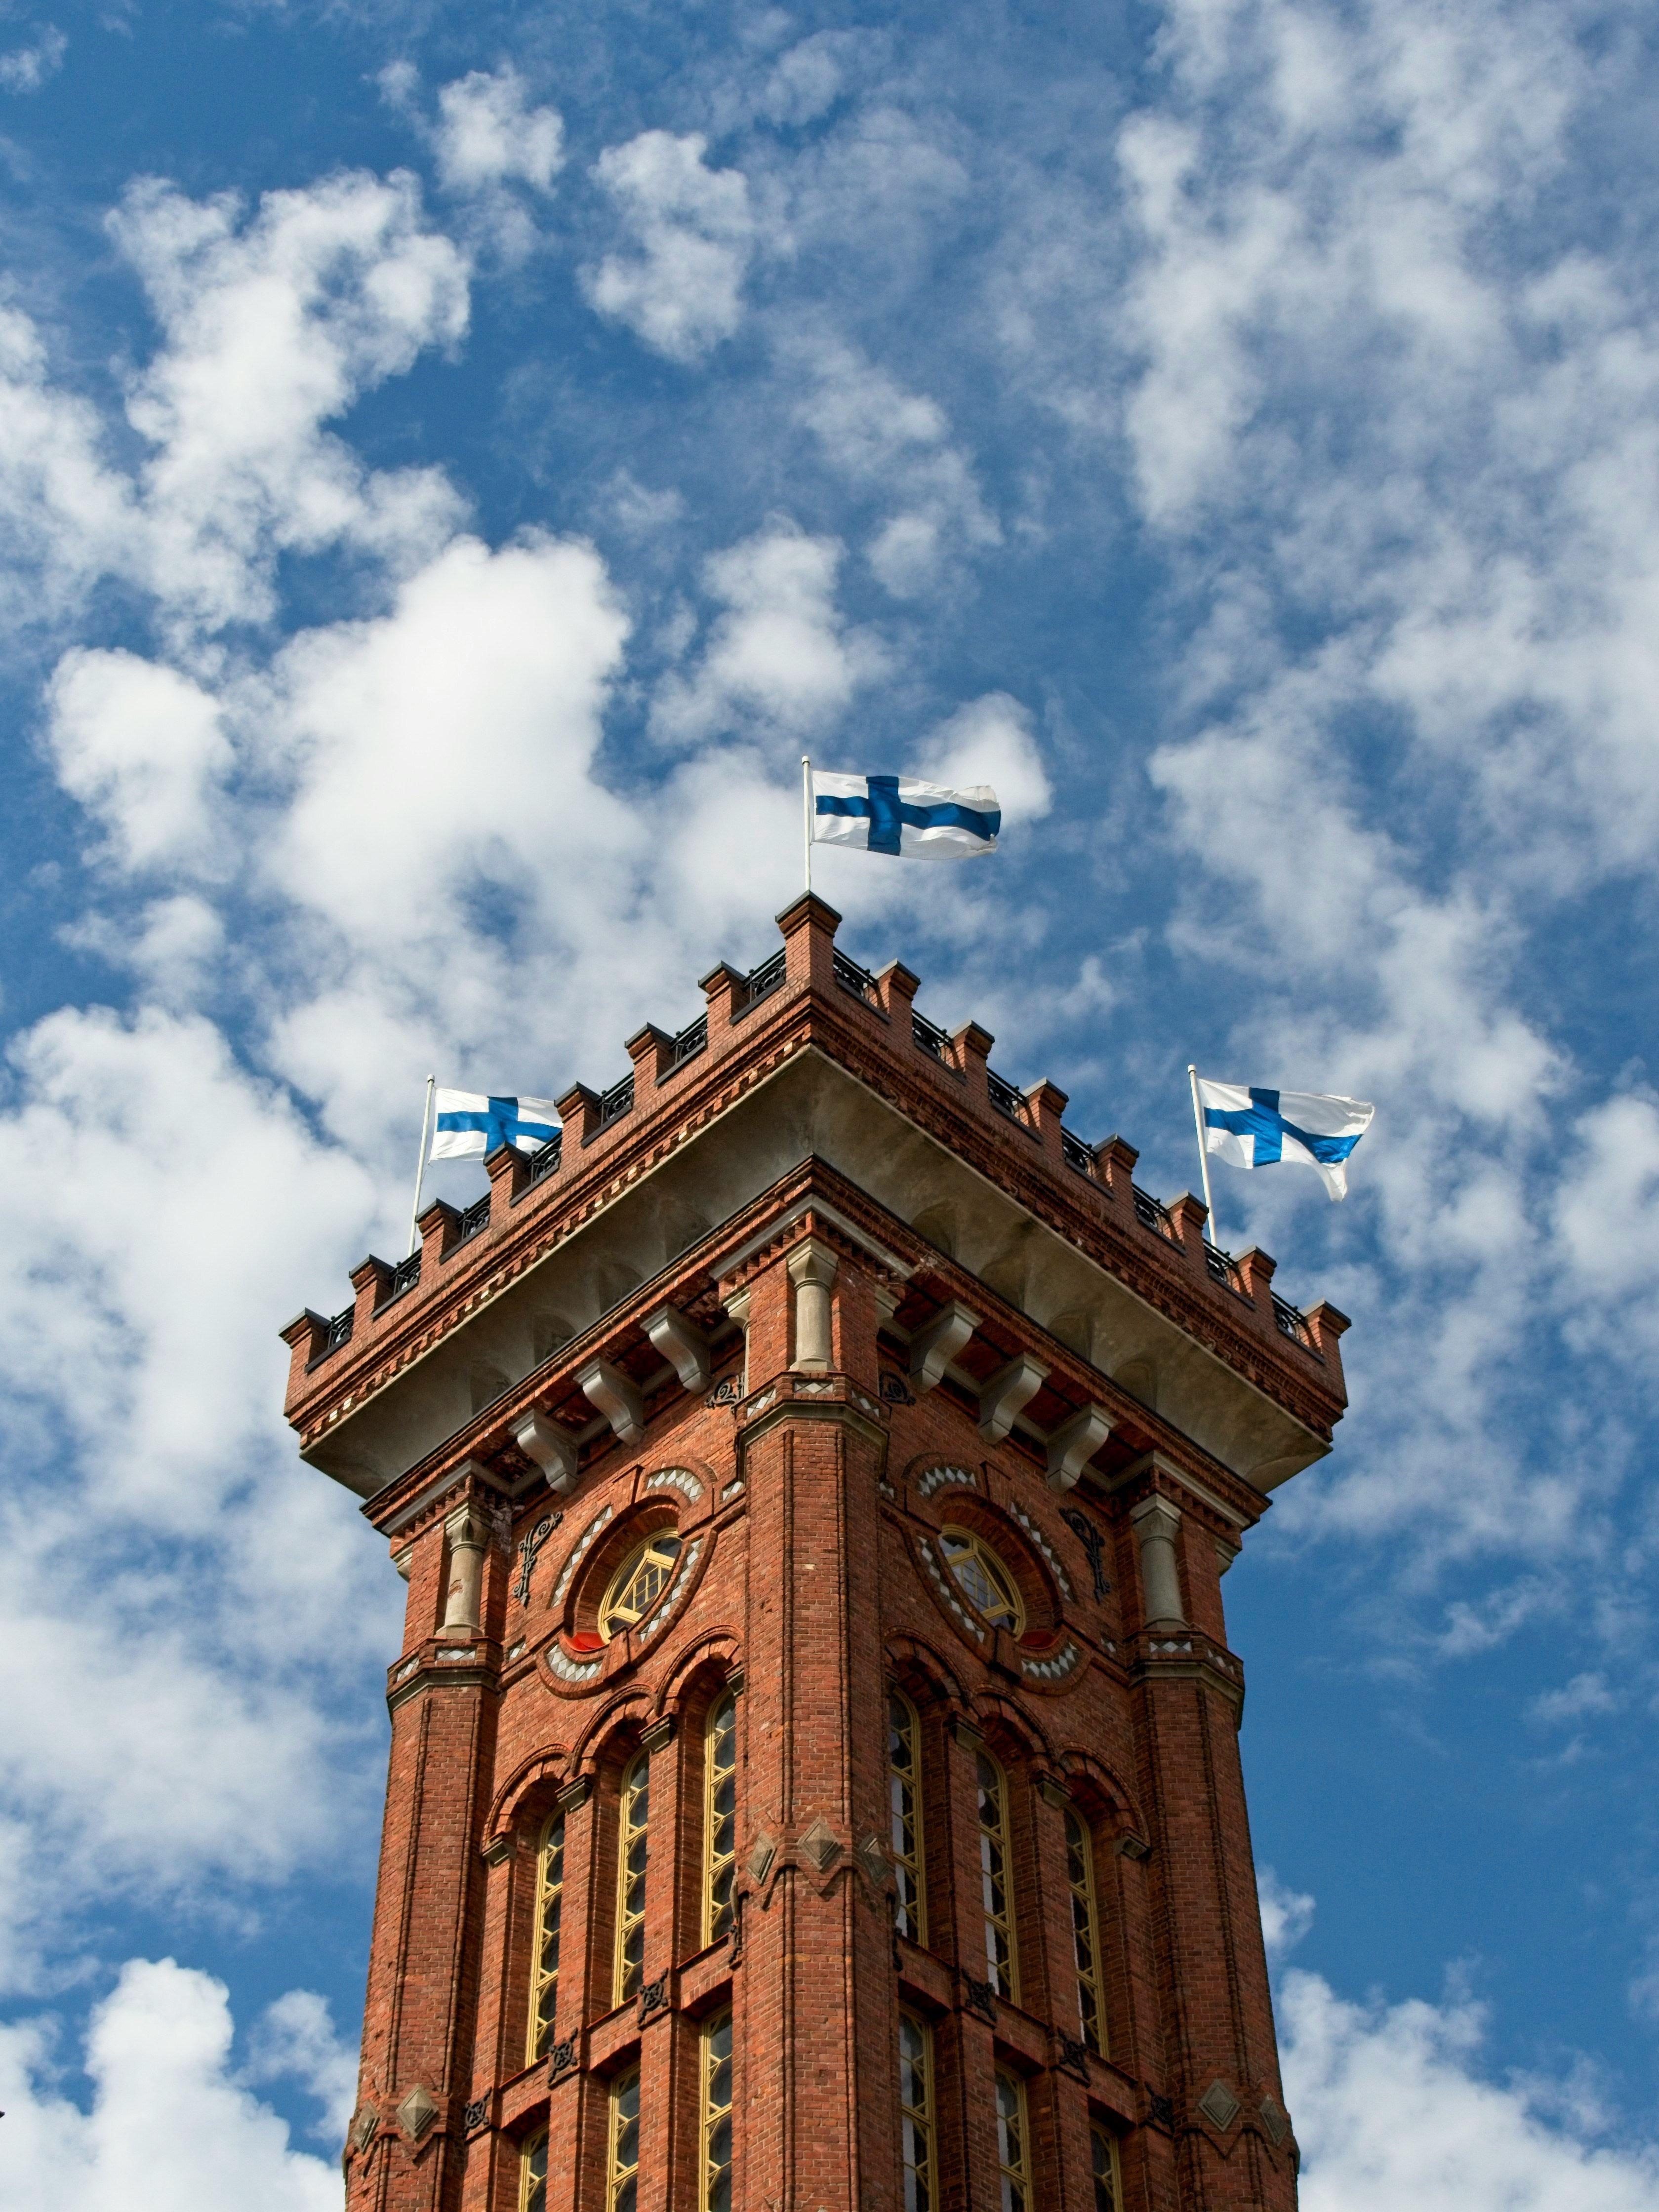 Flag of Finland on tower